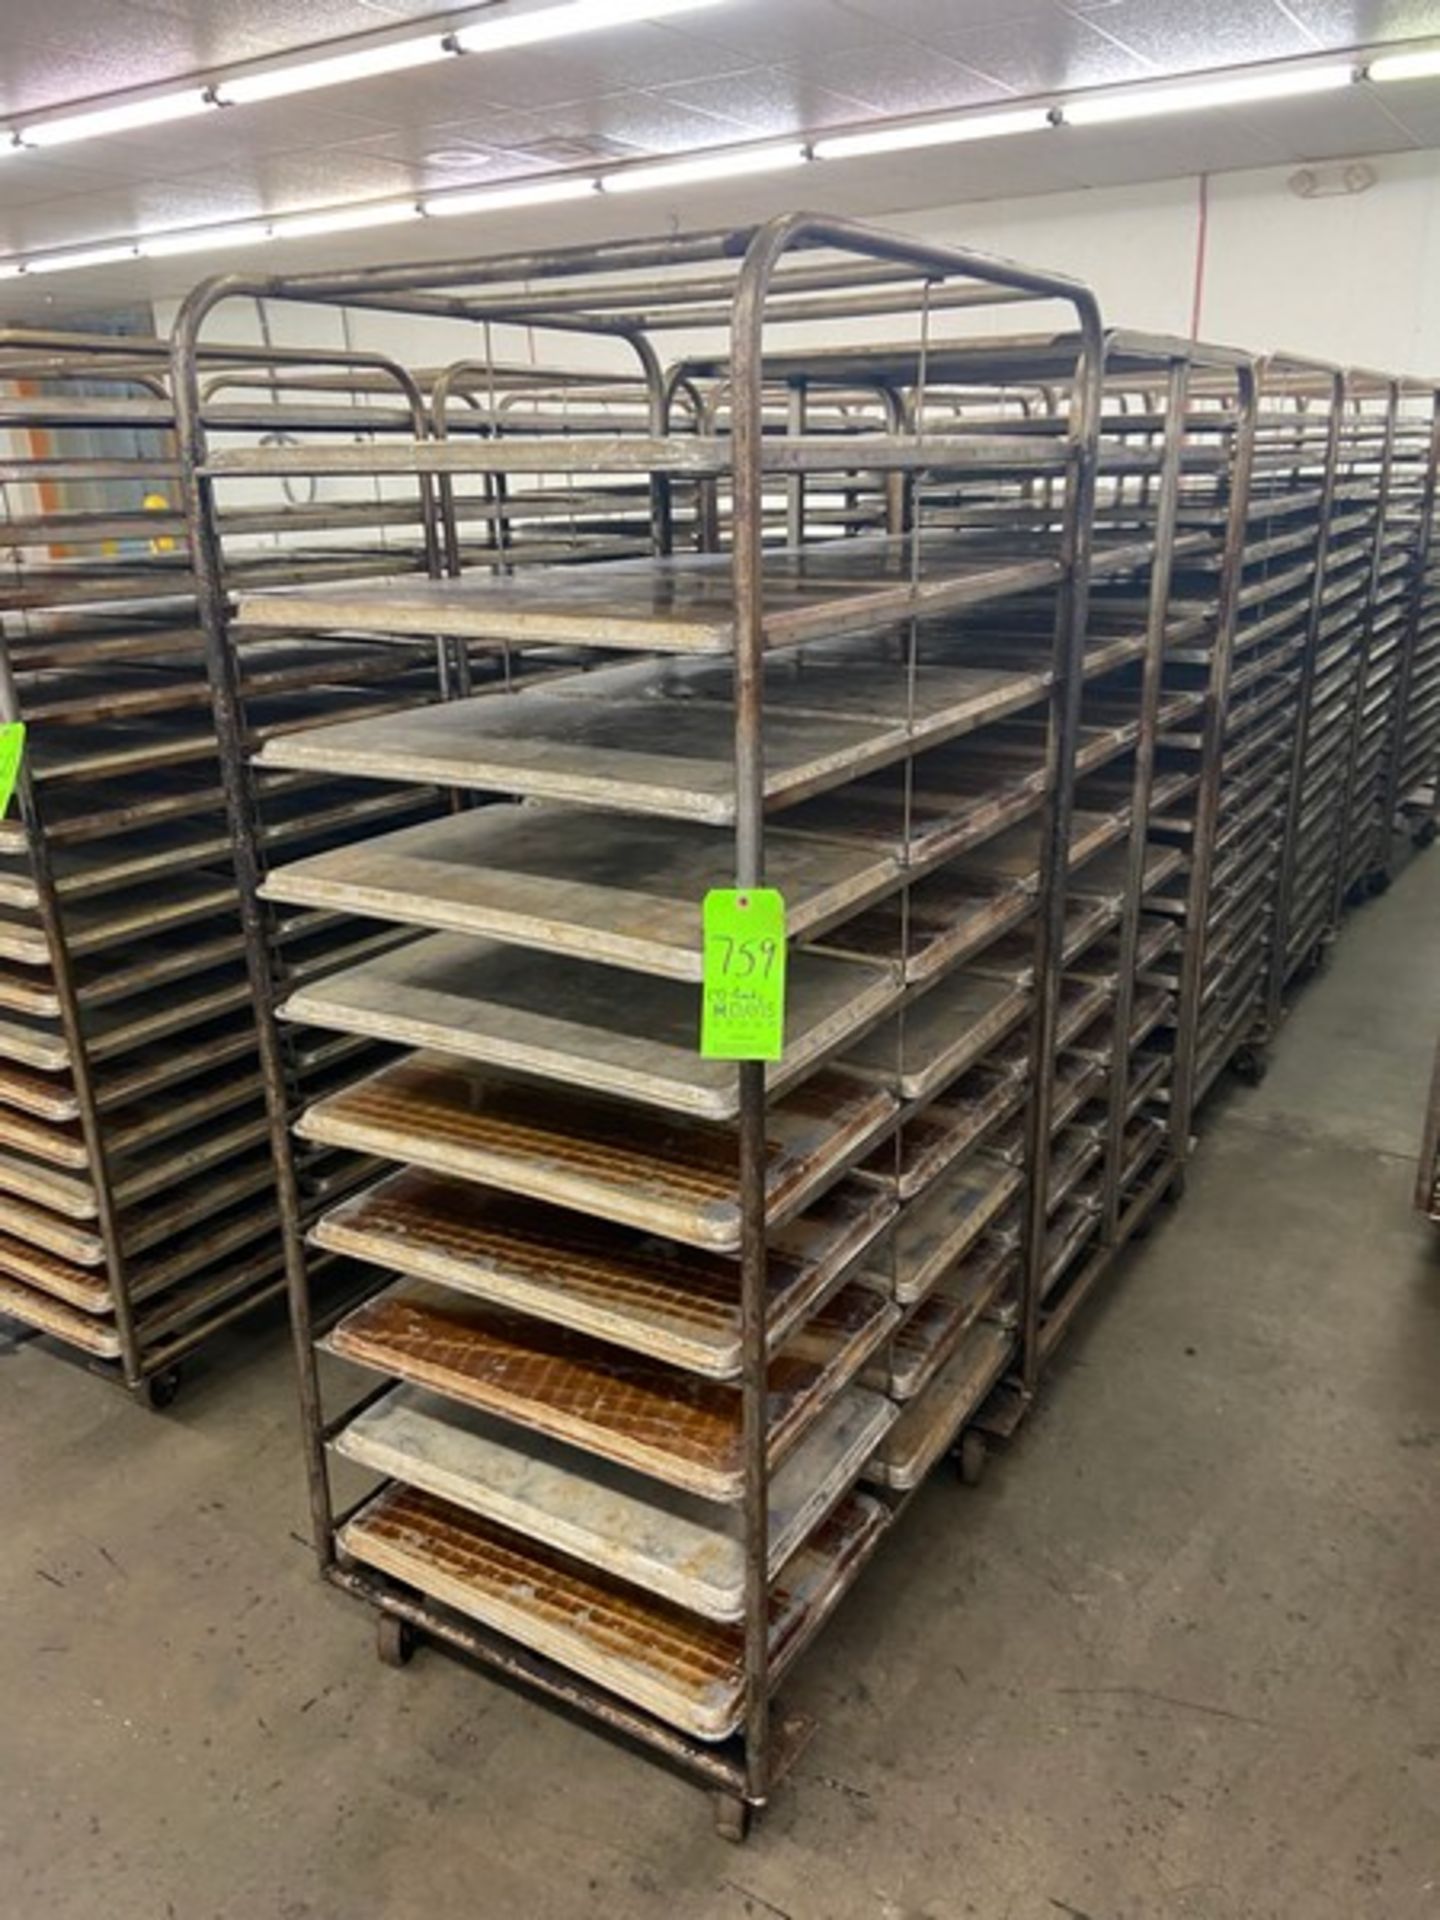 (7) PORTABLE DOUBLE SIDED BAKING PAN RACKS, MOUNTED ON CASTERS (LOCATED IN HERMITAGE, PA)